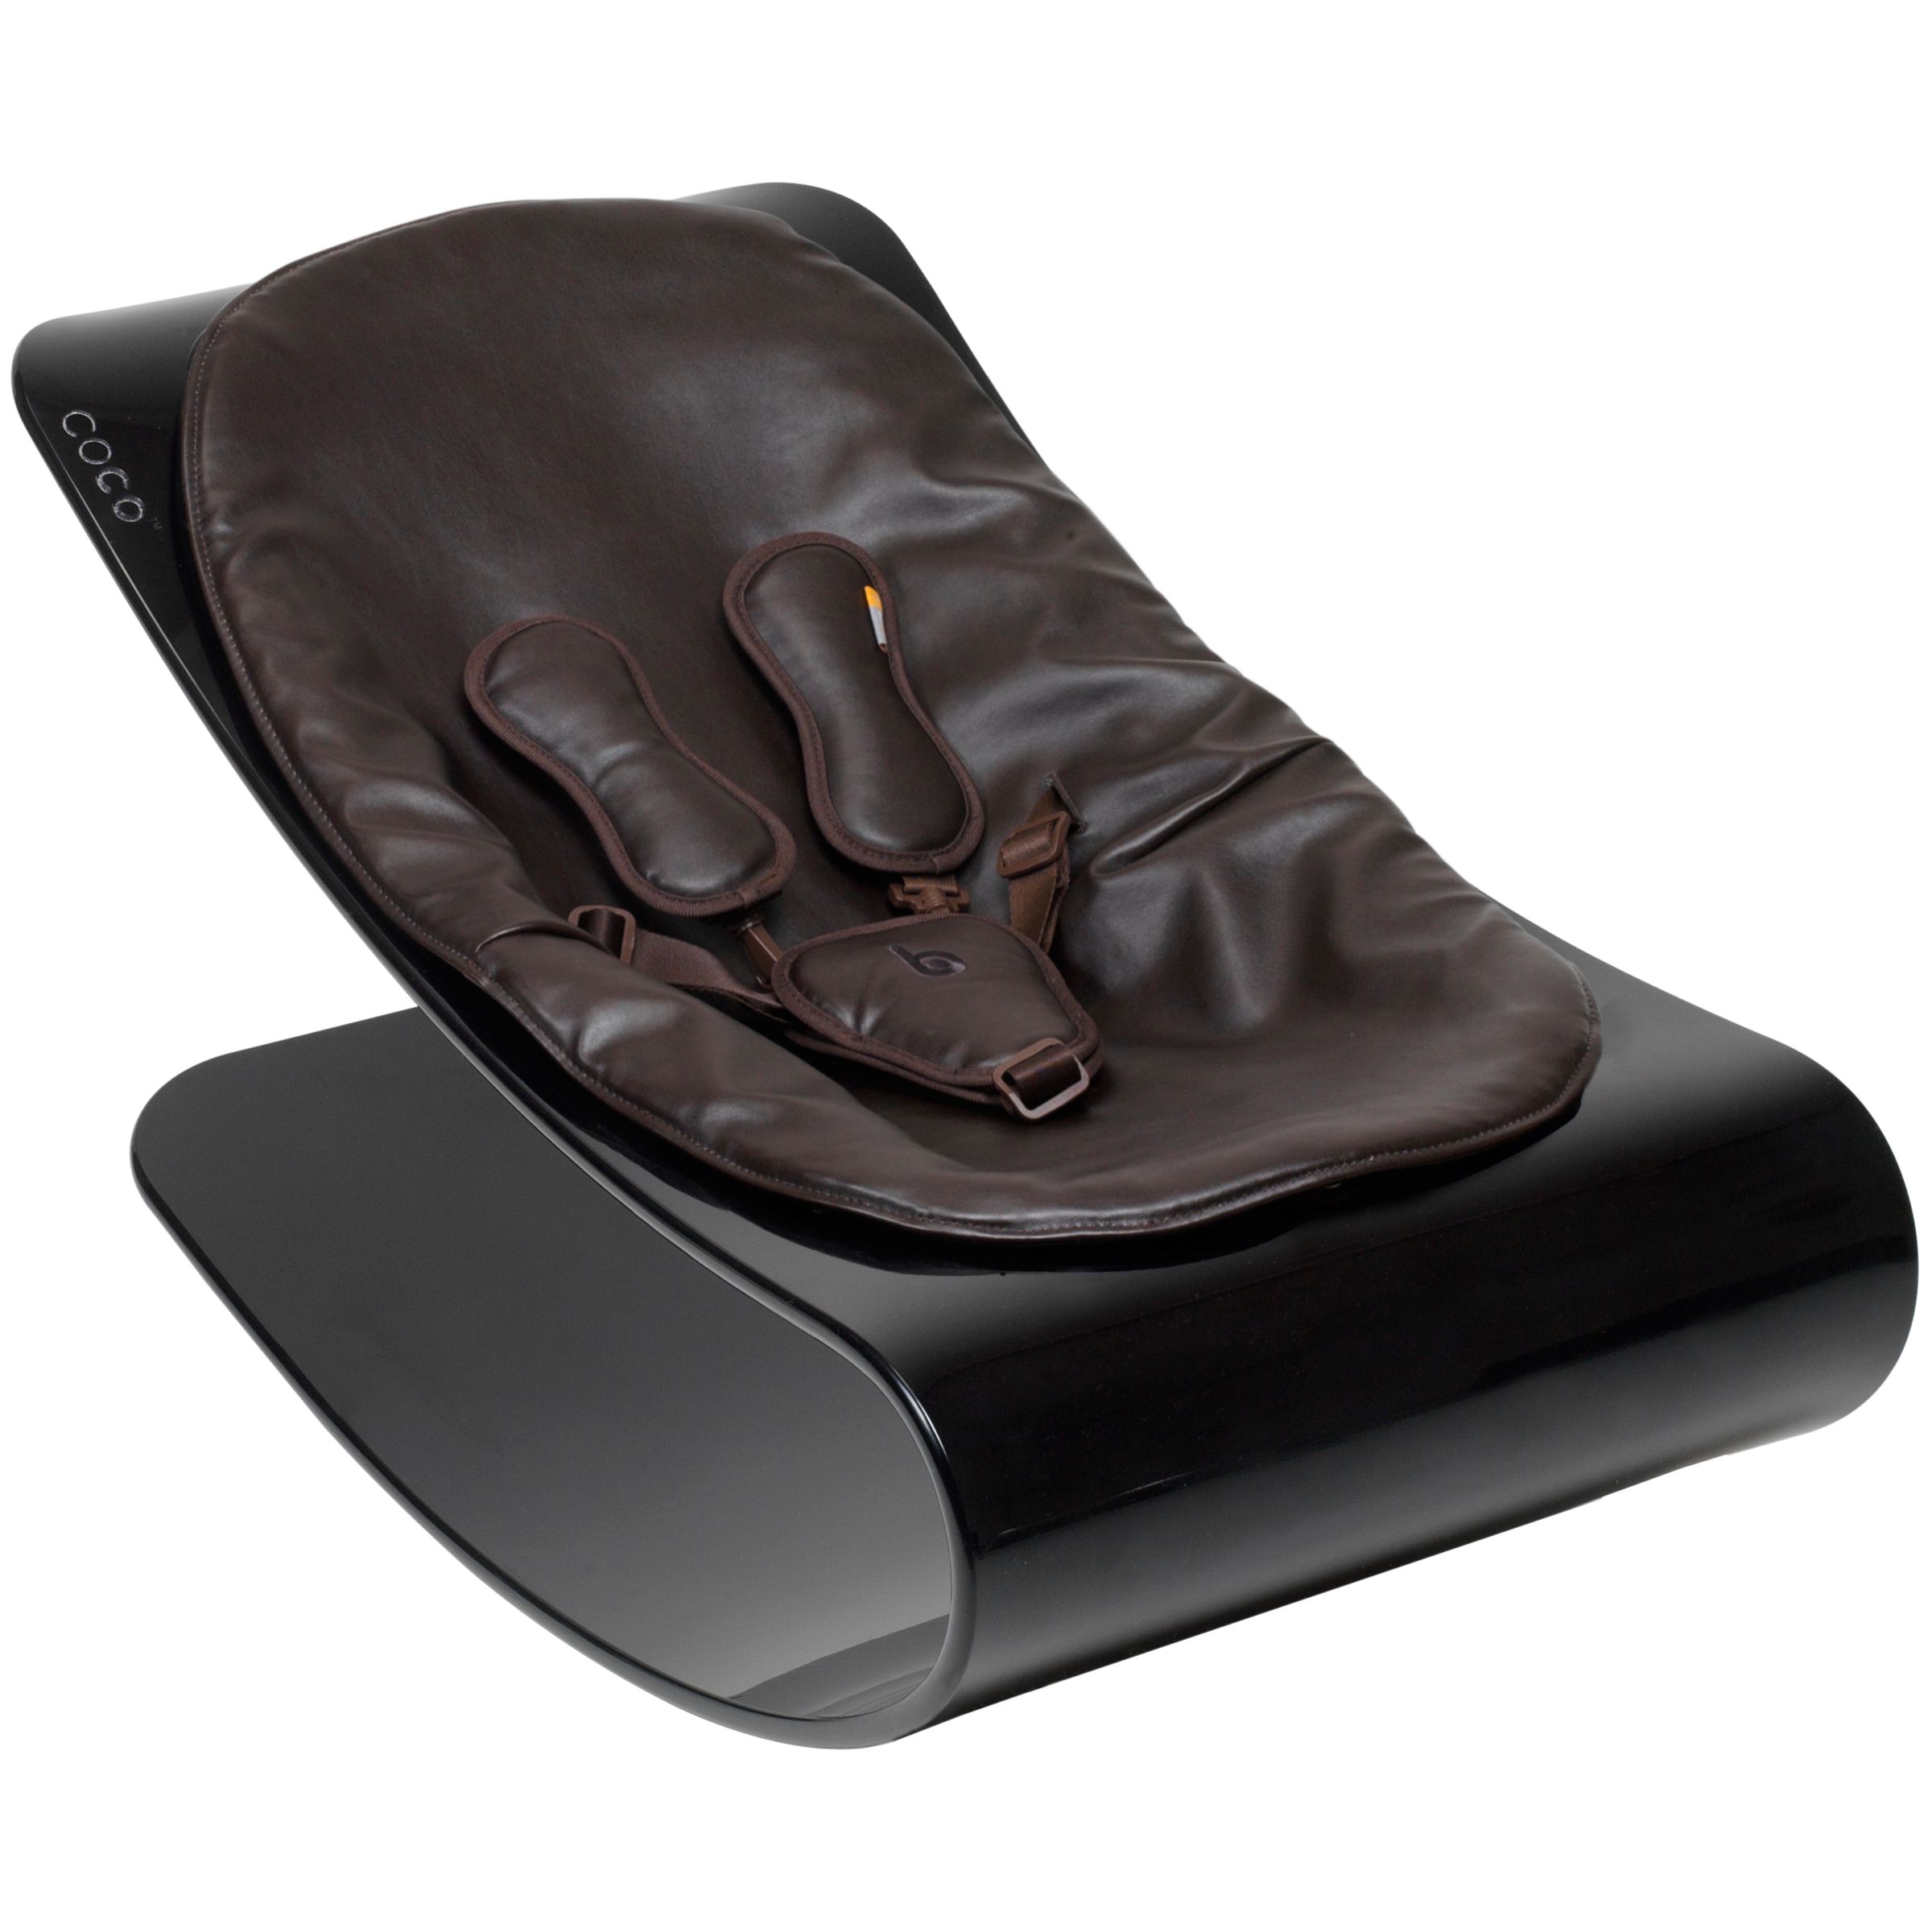 bloom Coco Plexistyle Baby Lounger, Ebony Black with Henna Brown at JohnLewis